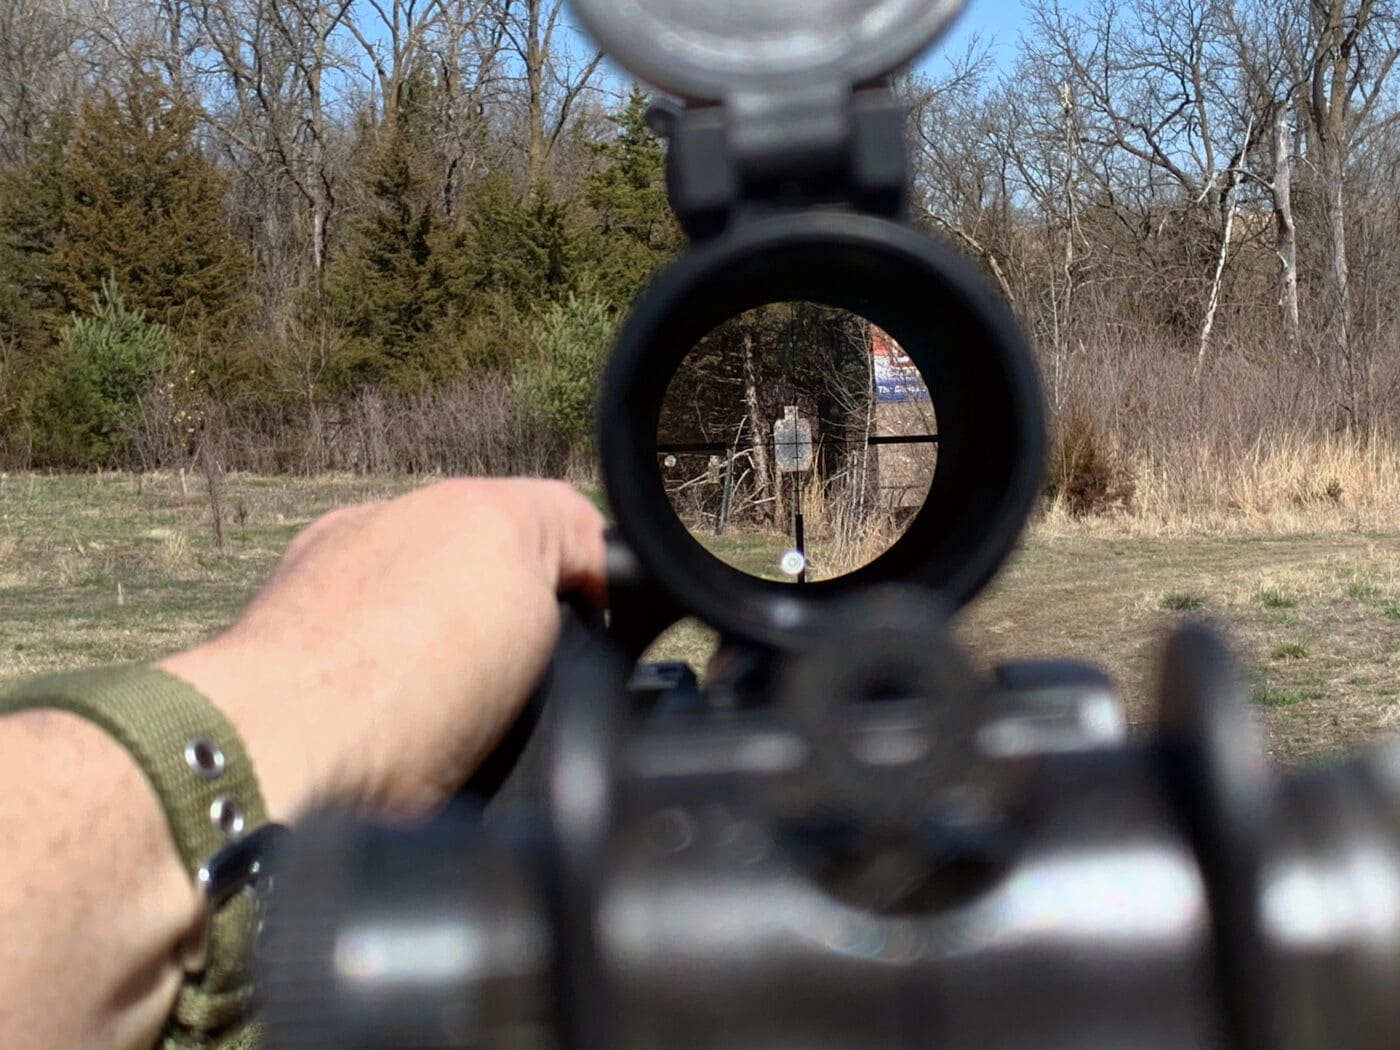 Demonstration of hand placement with Ryker Grip installed on M1A in relation to the scope